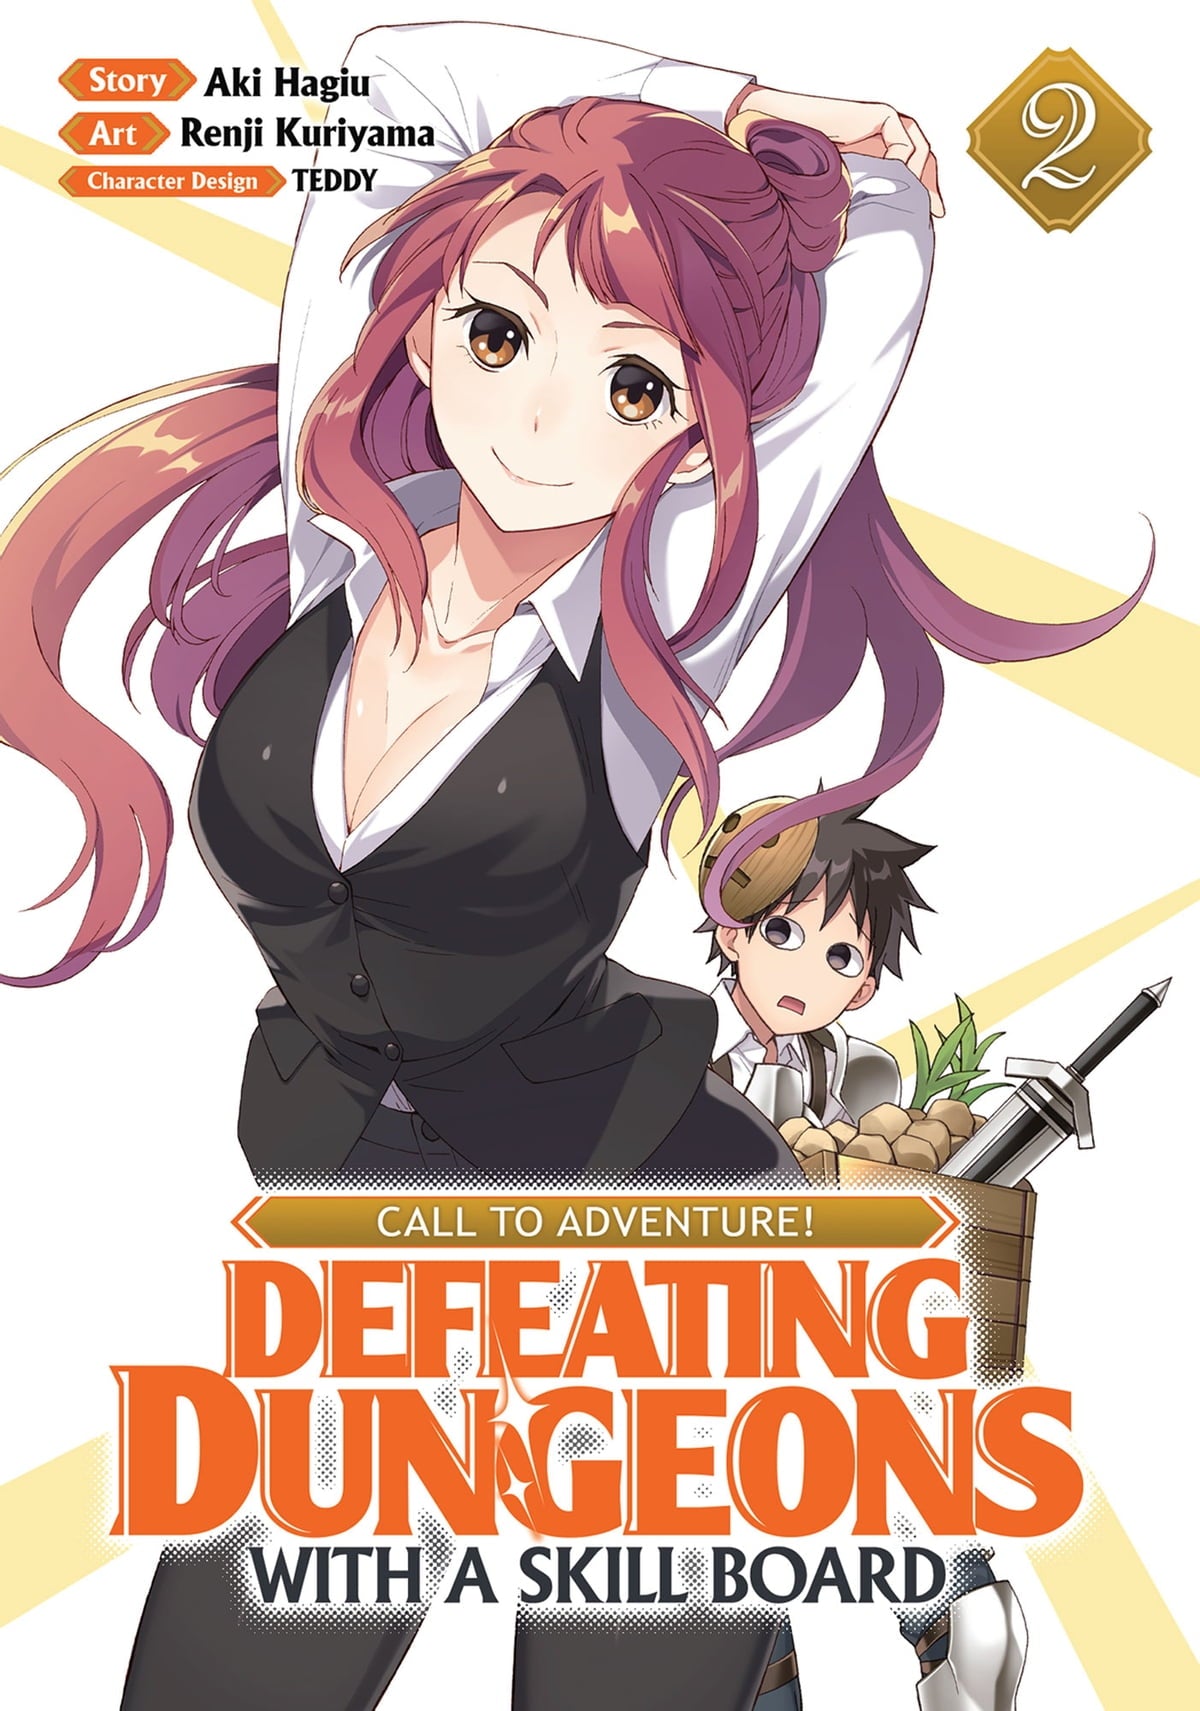 CALL TO ADVENTURE! Defeating Du - Game On